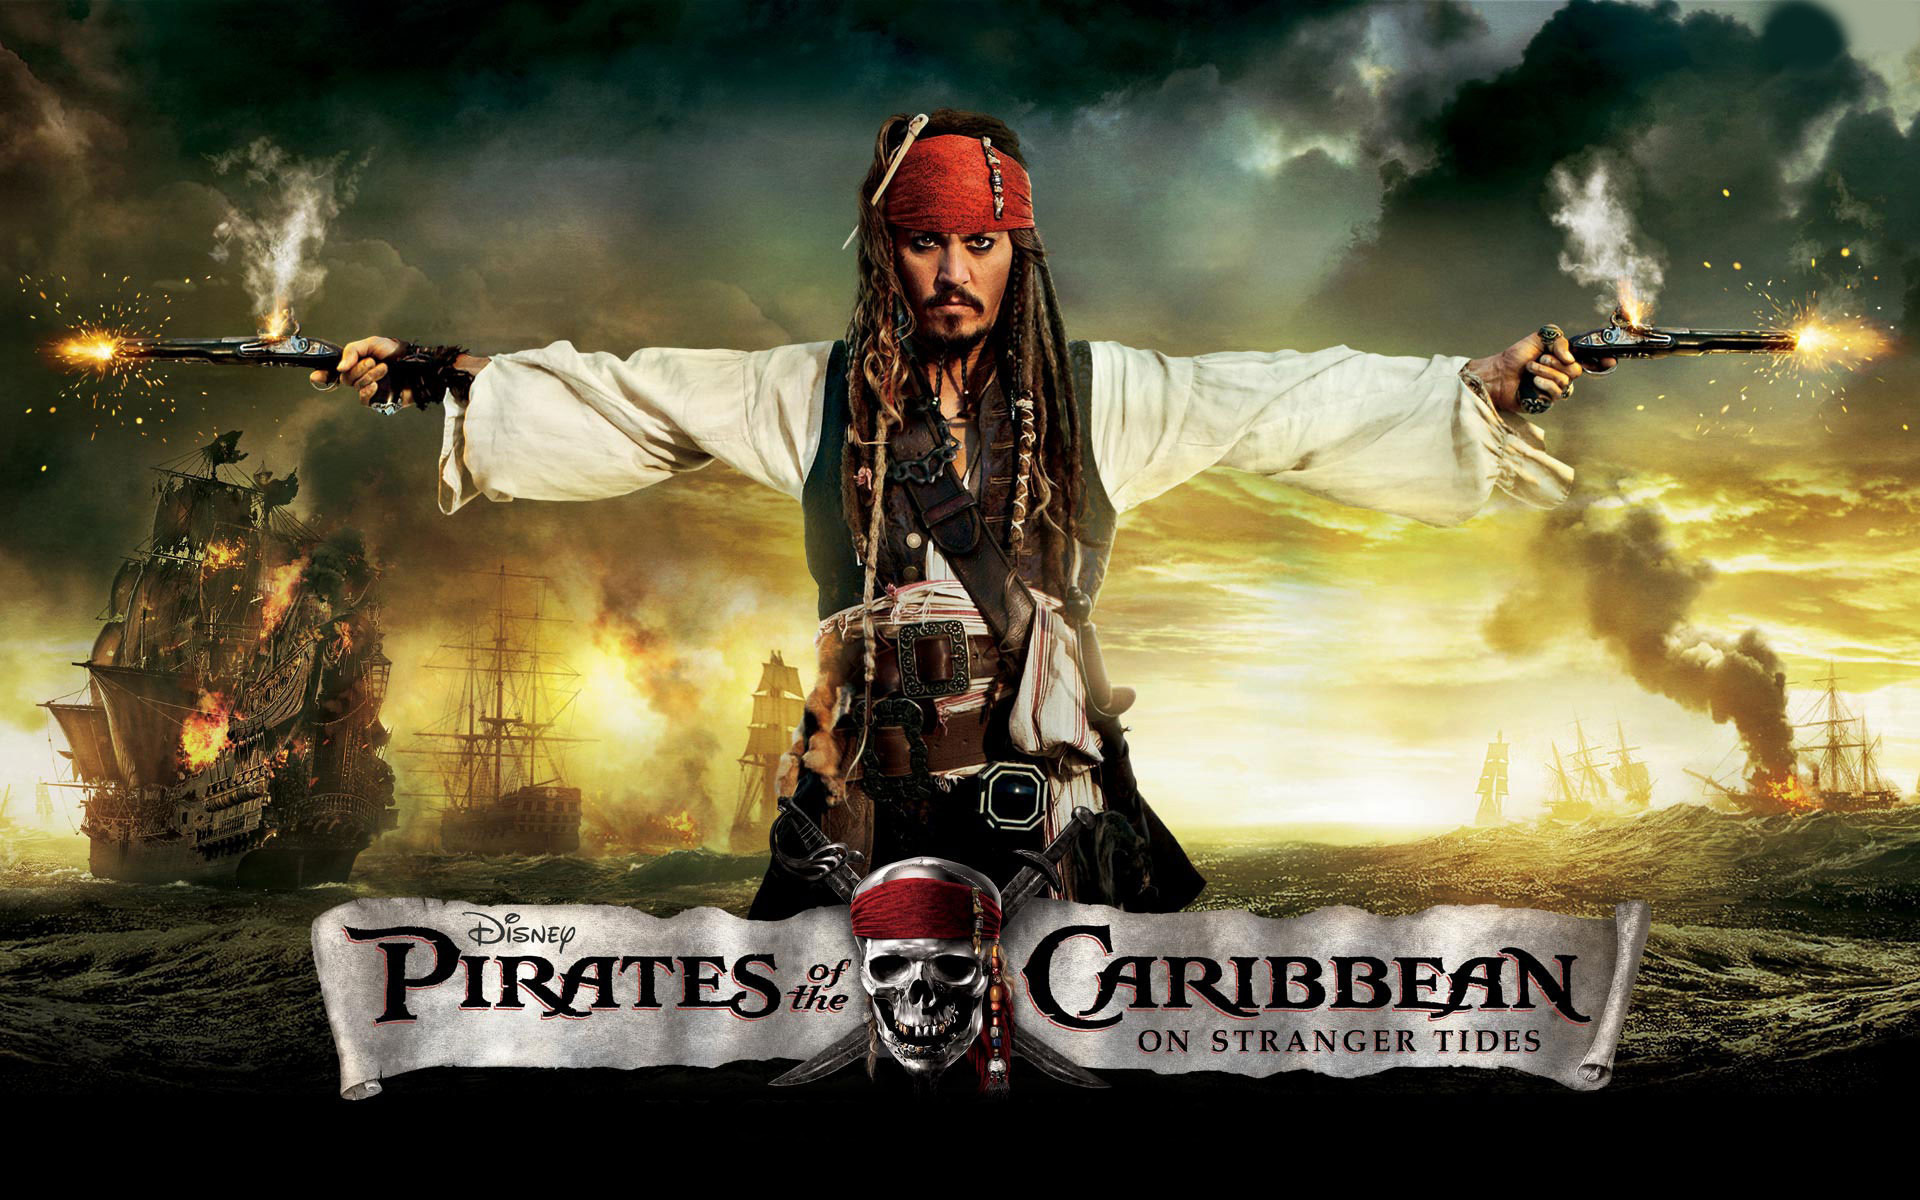 Wallpapers pirates of the caribbean joni depp actor on the desktop